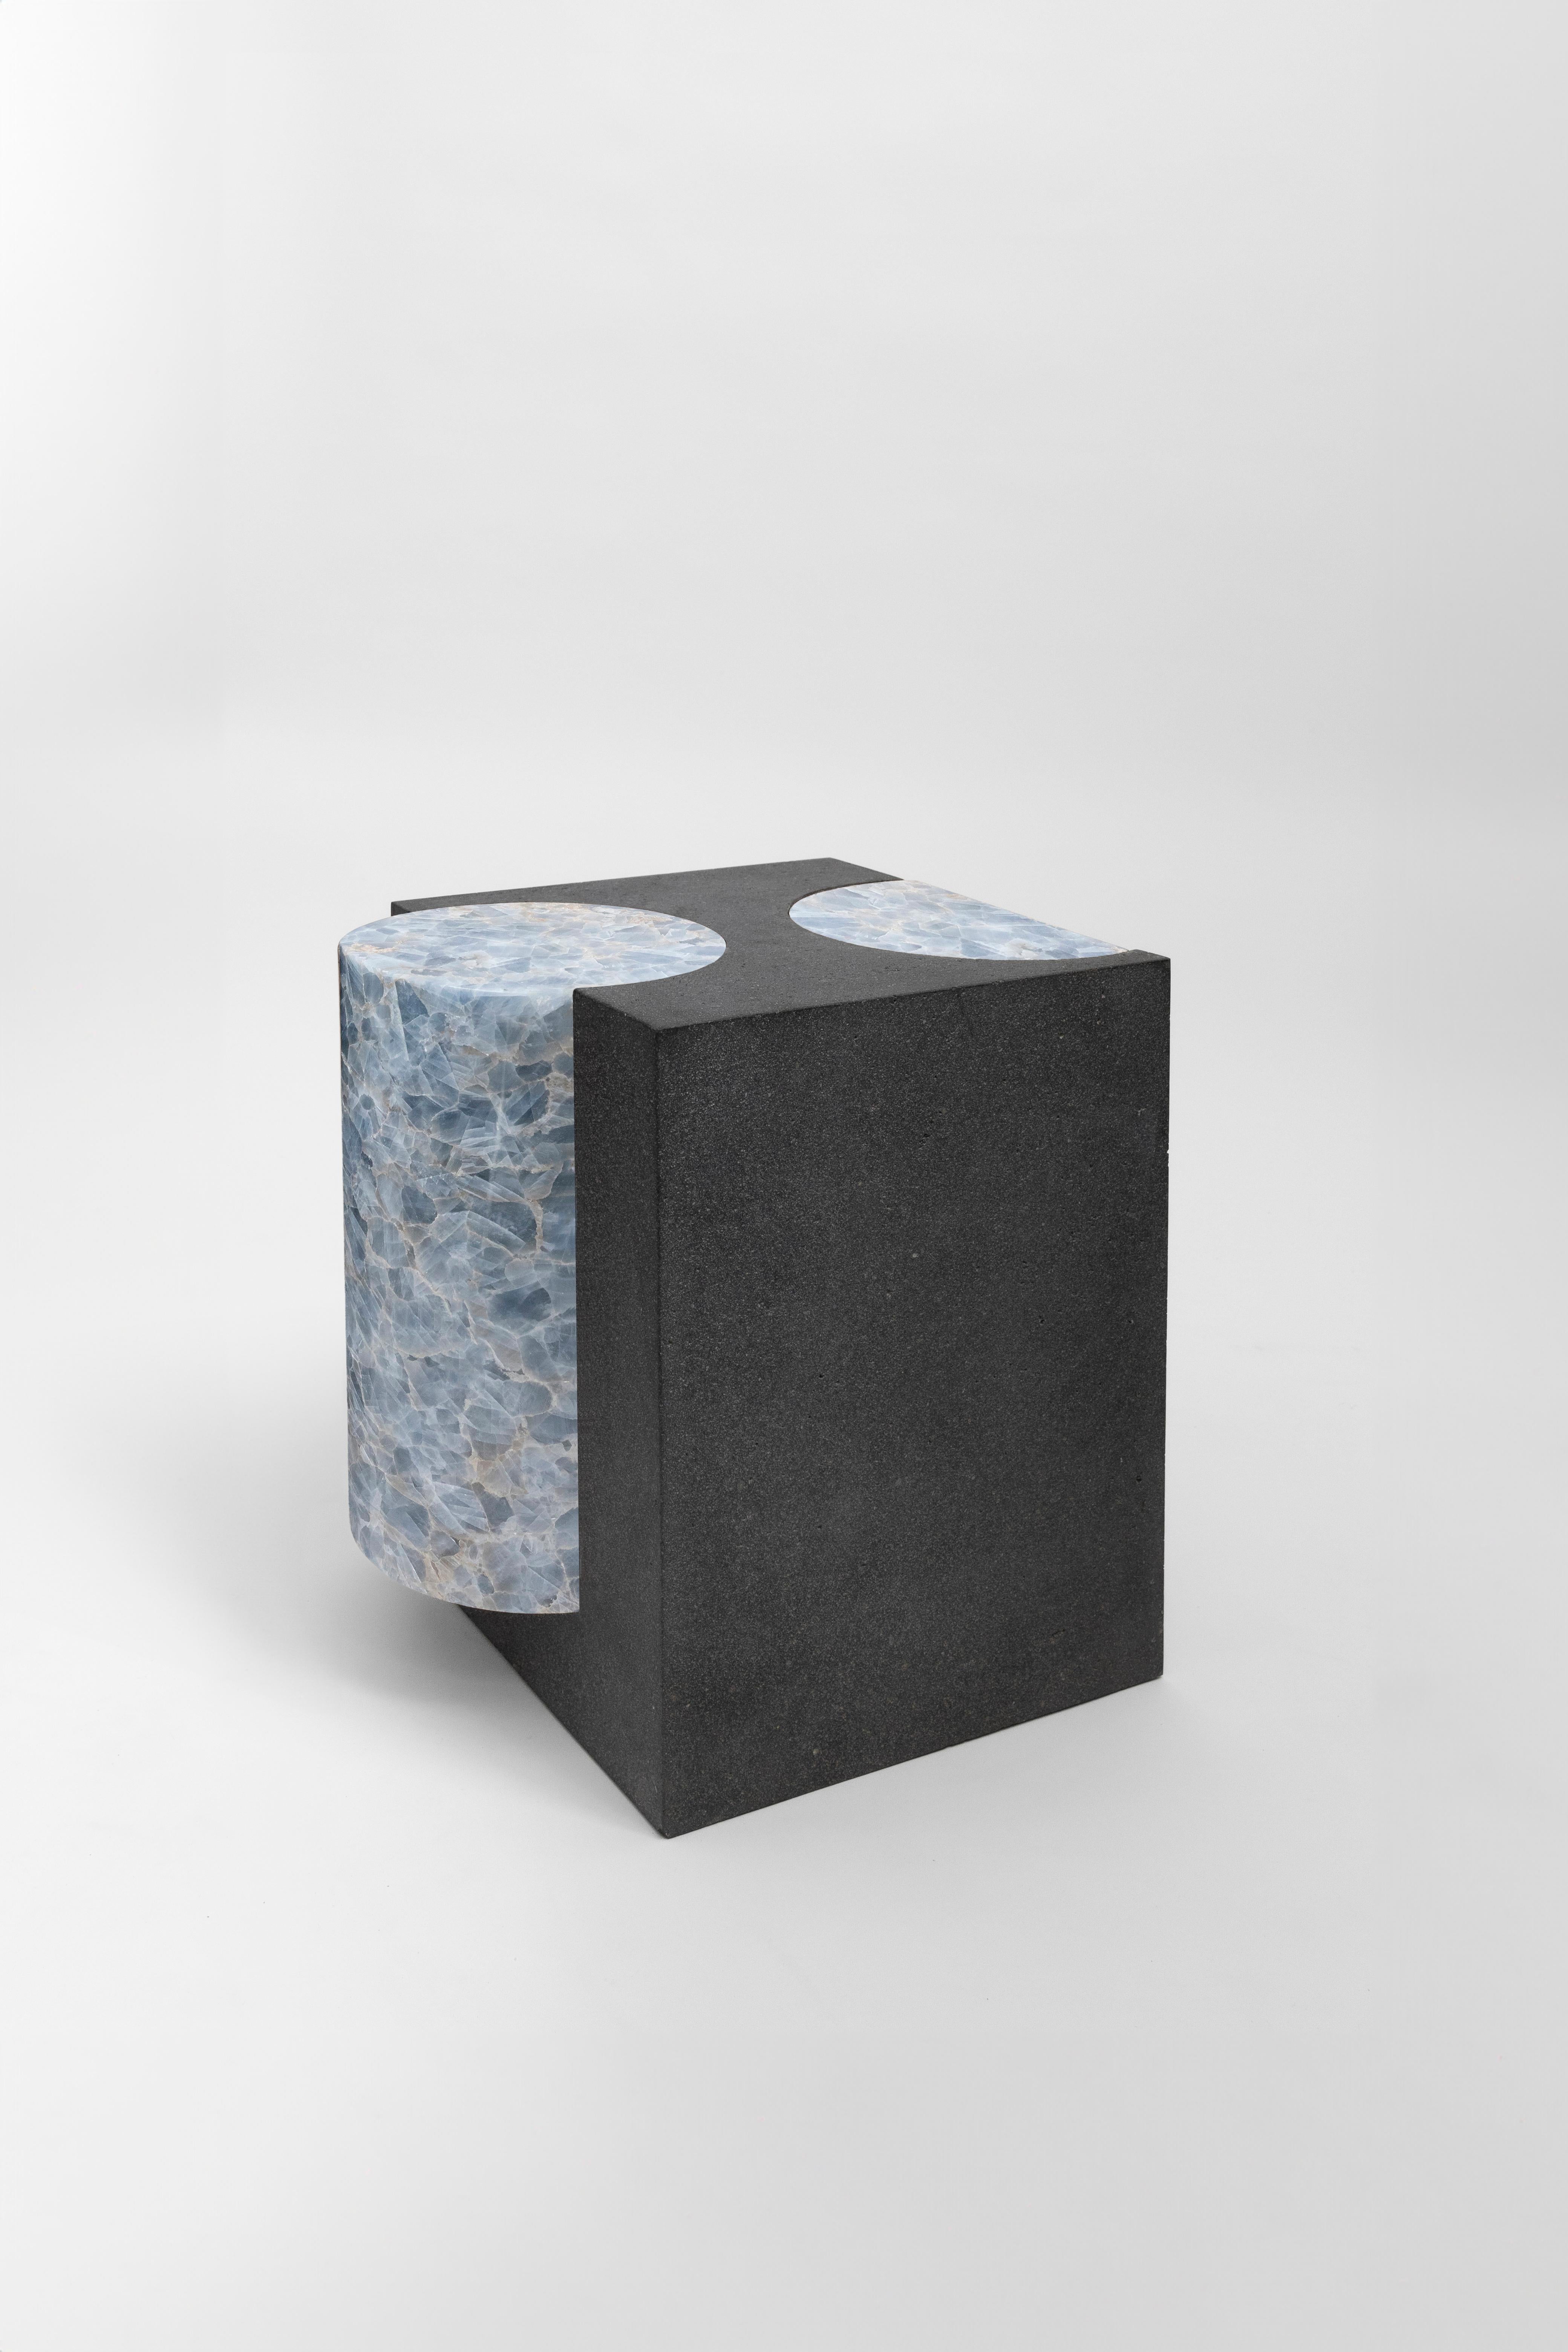 Materials: Lava stone and blue calcite
Indoors and outdoors
Side table / Stool

**As this work is made of natural stone, color and veins may vary from the photo**

Through an abstract geometric language where cubes and cylinders playfully alternate,